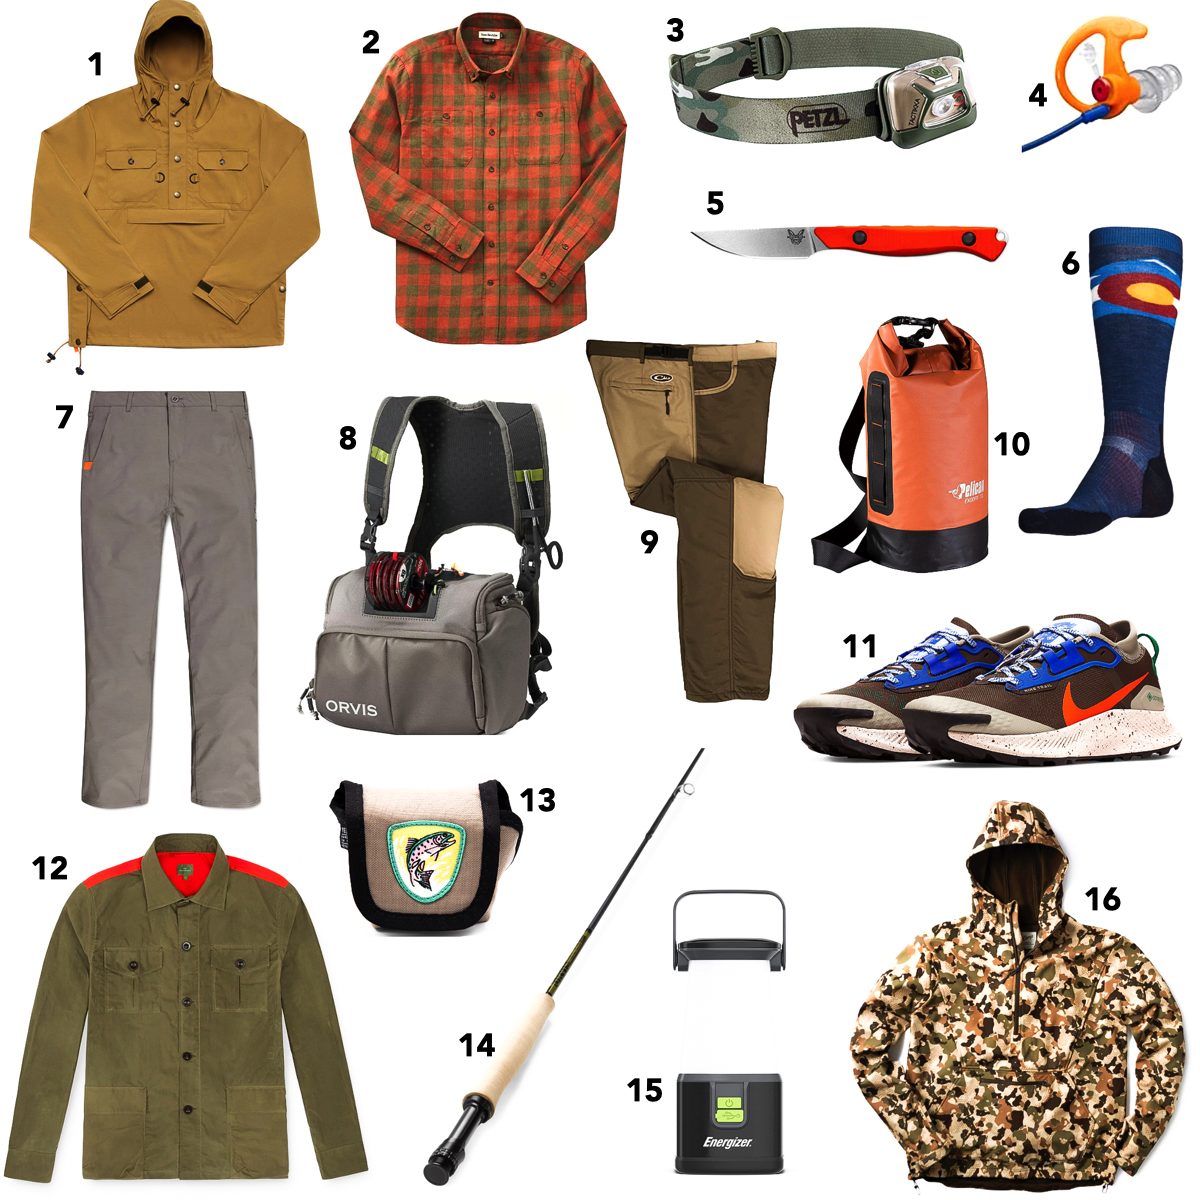 Gear Review: Orvis Gear Roundup